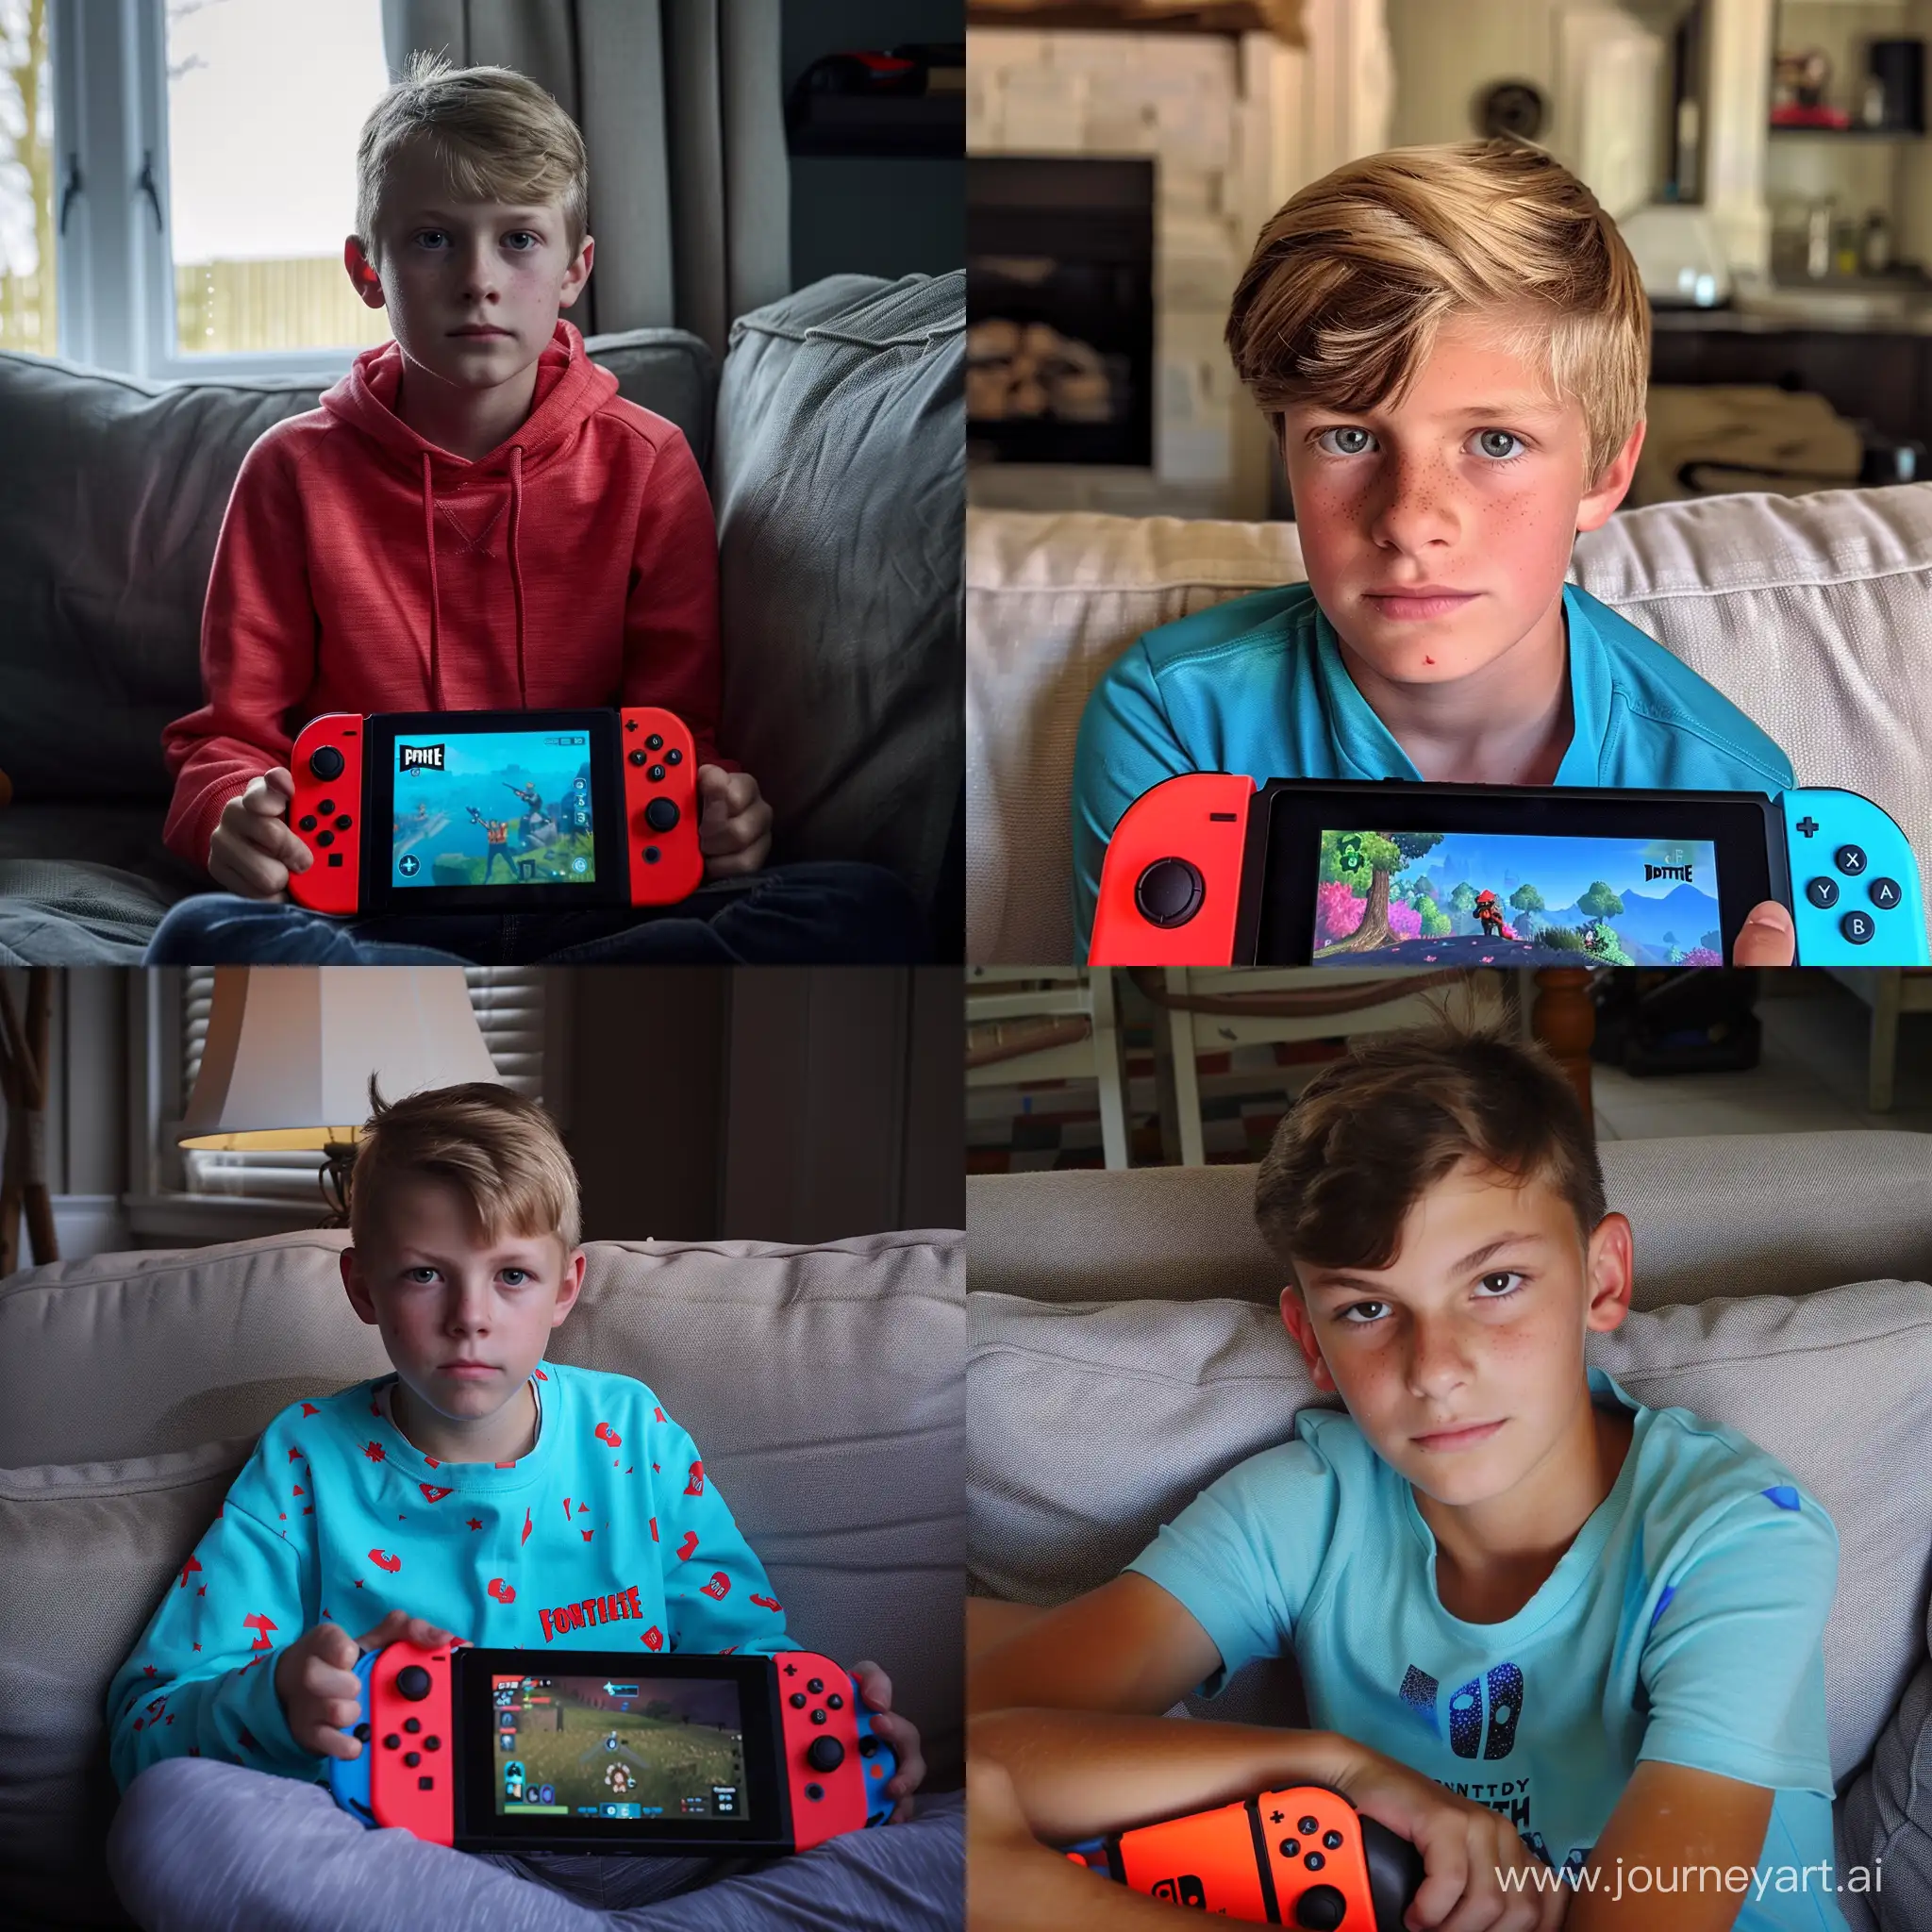 my 12 years old son, after 2 hours of gaming on his switch at fortnite